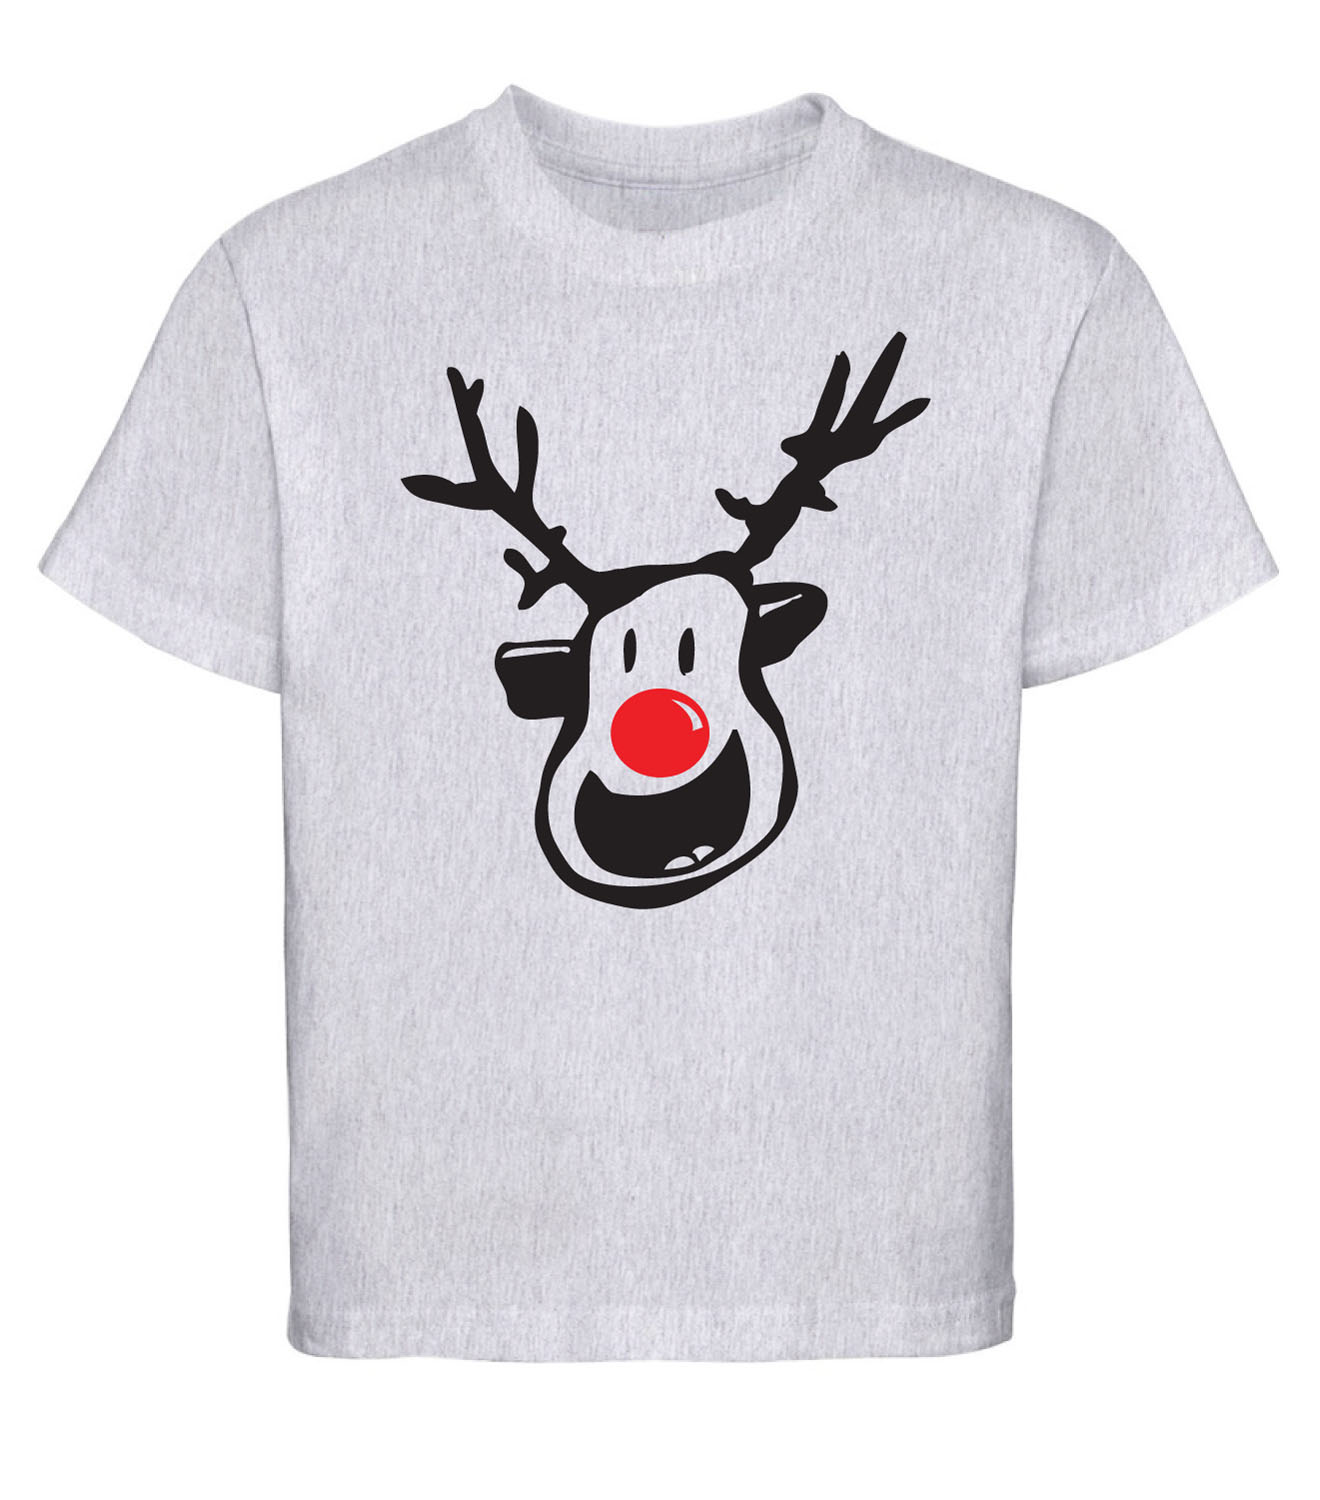 Christmas Baby Childs Younger Boys Cute Rudolf Red Nose Reindeer Novelty Top 